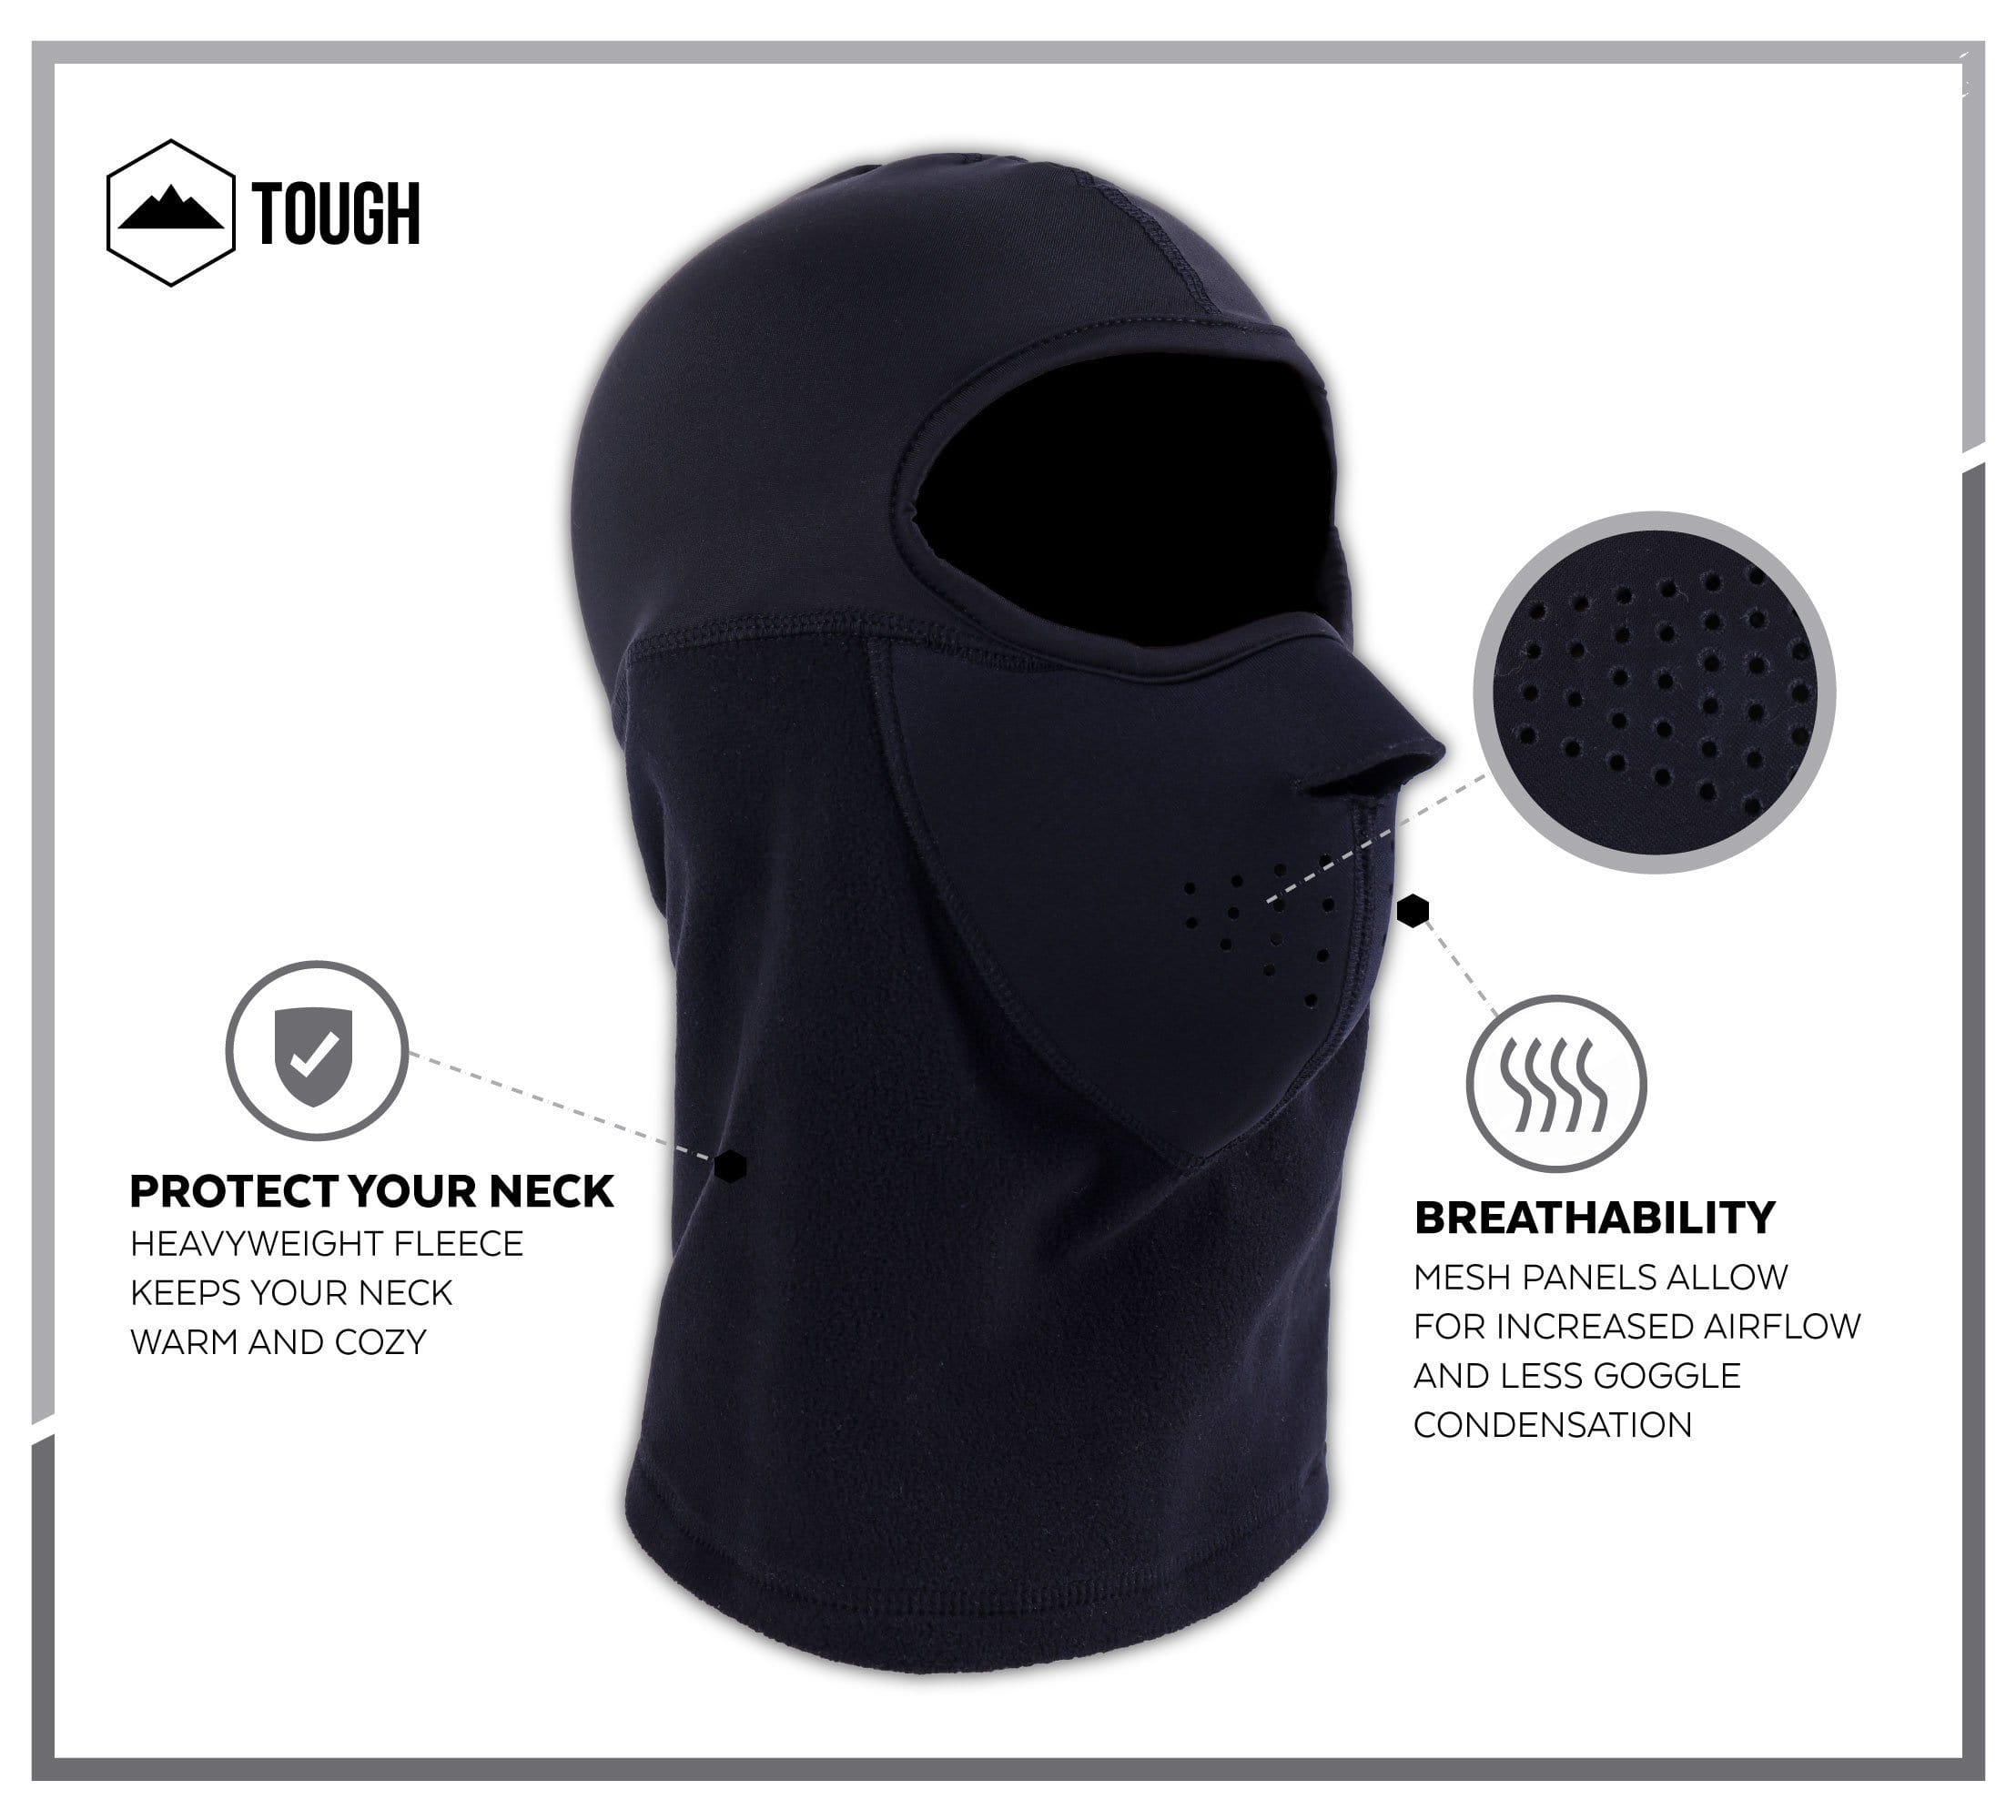 Balaclava Ski Mask Warm Face Mask For Cold Weather Winter Skiing